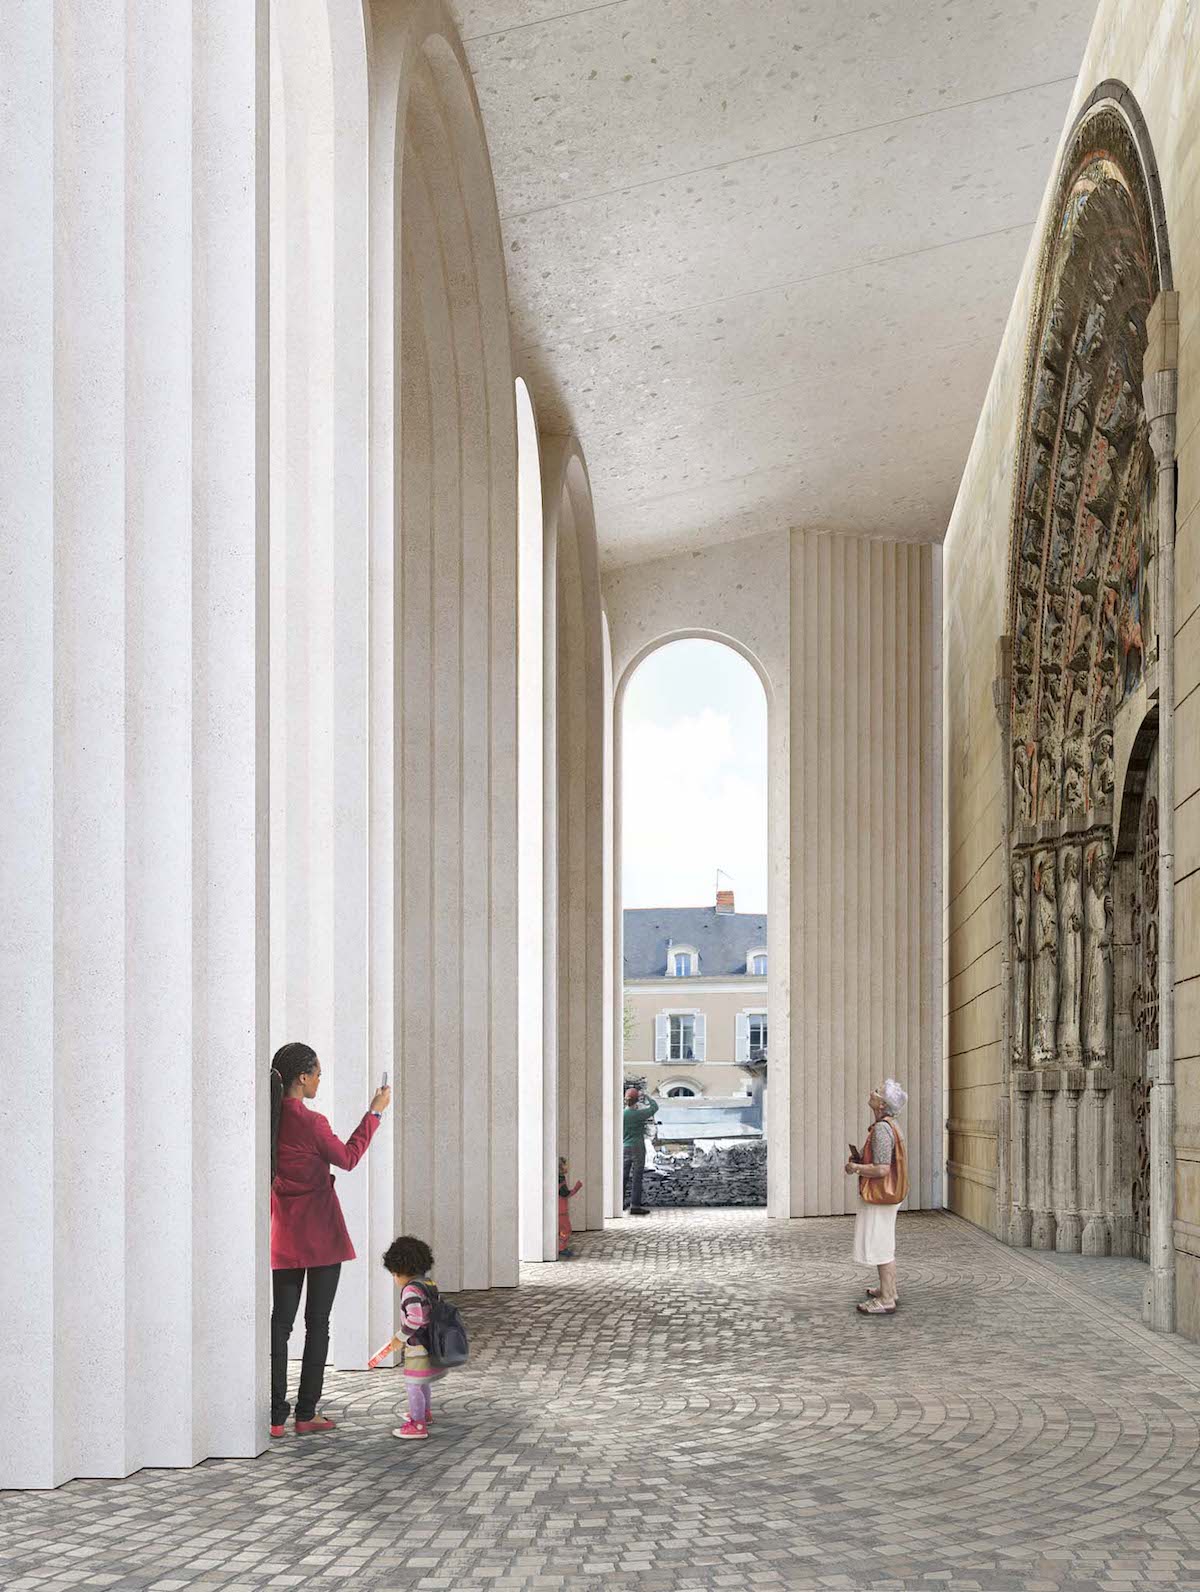 Ground Level View of Kengo Kuma and Associates Designed Contemporary Entrance to Angers Cathedral